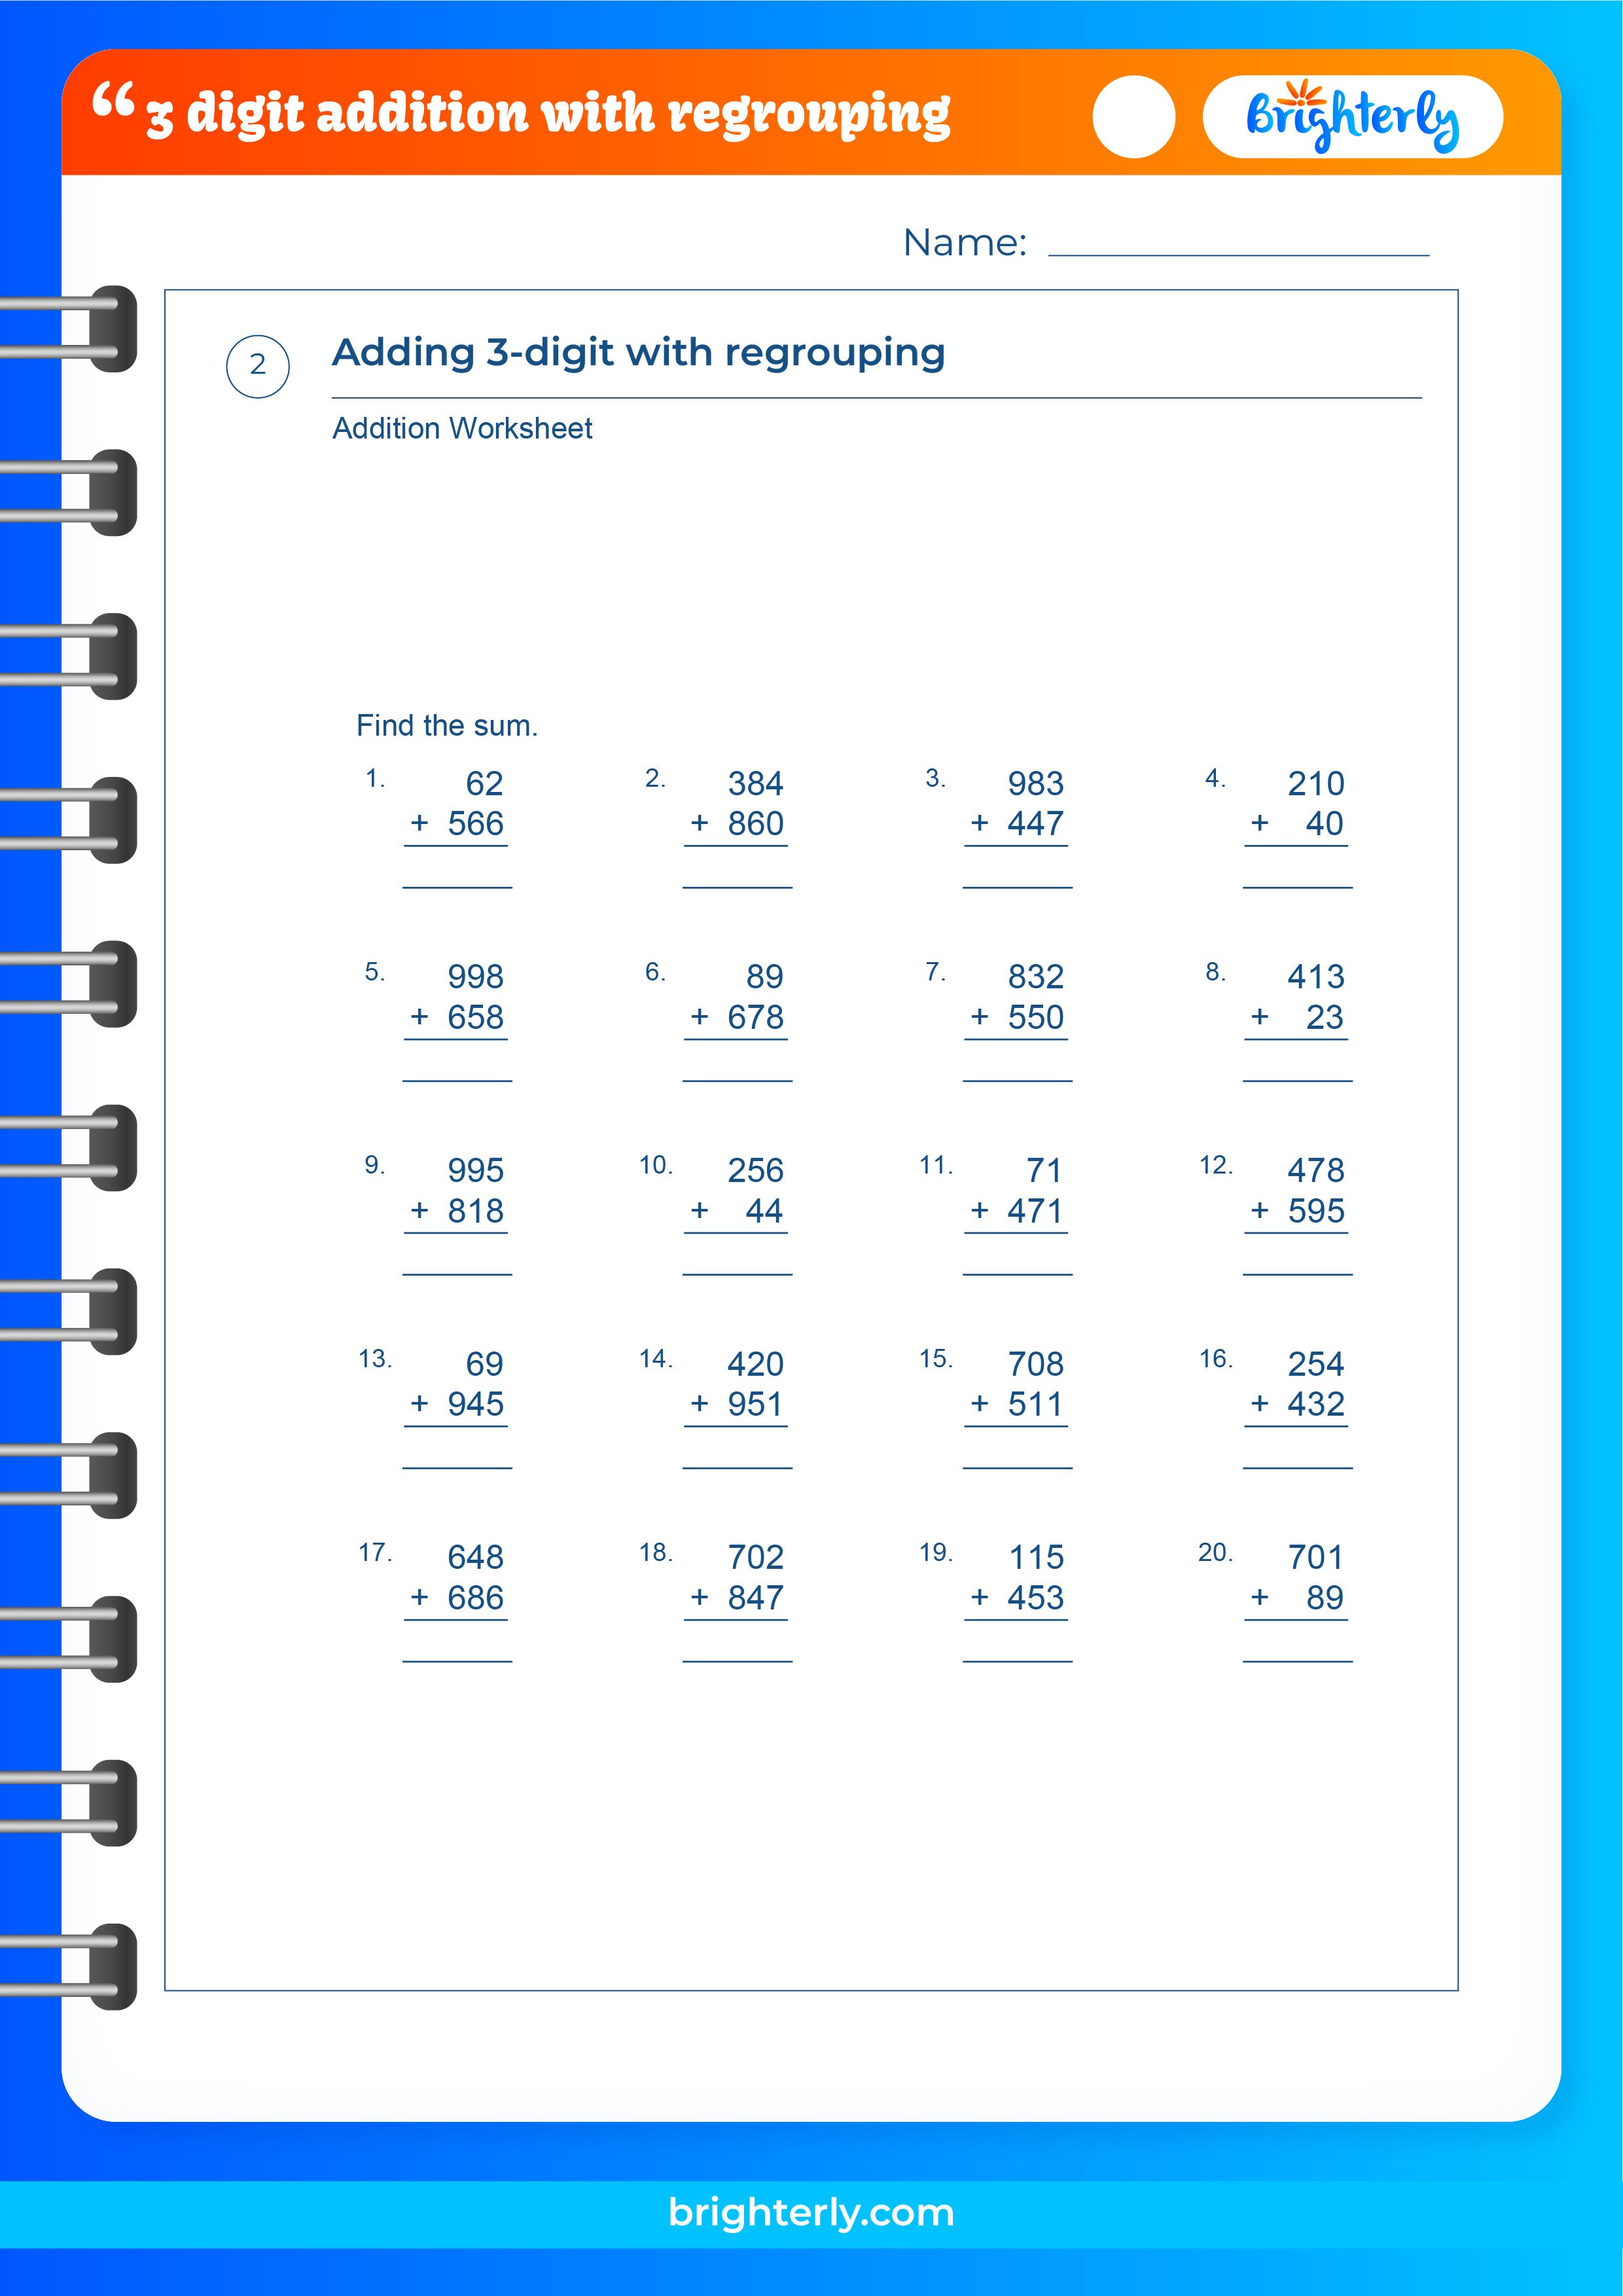 free-3-digit-addition-with-regrouping-worksheets-pdfs-brighterly